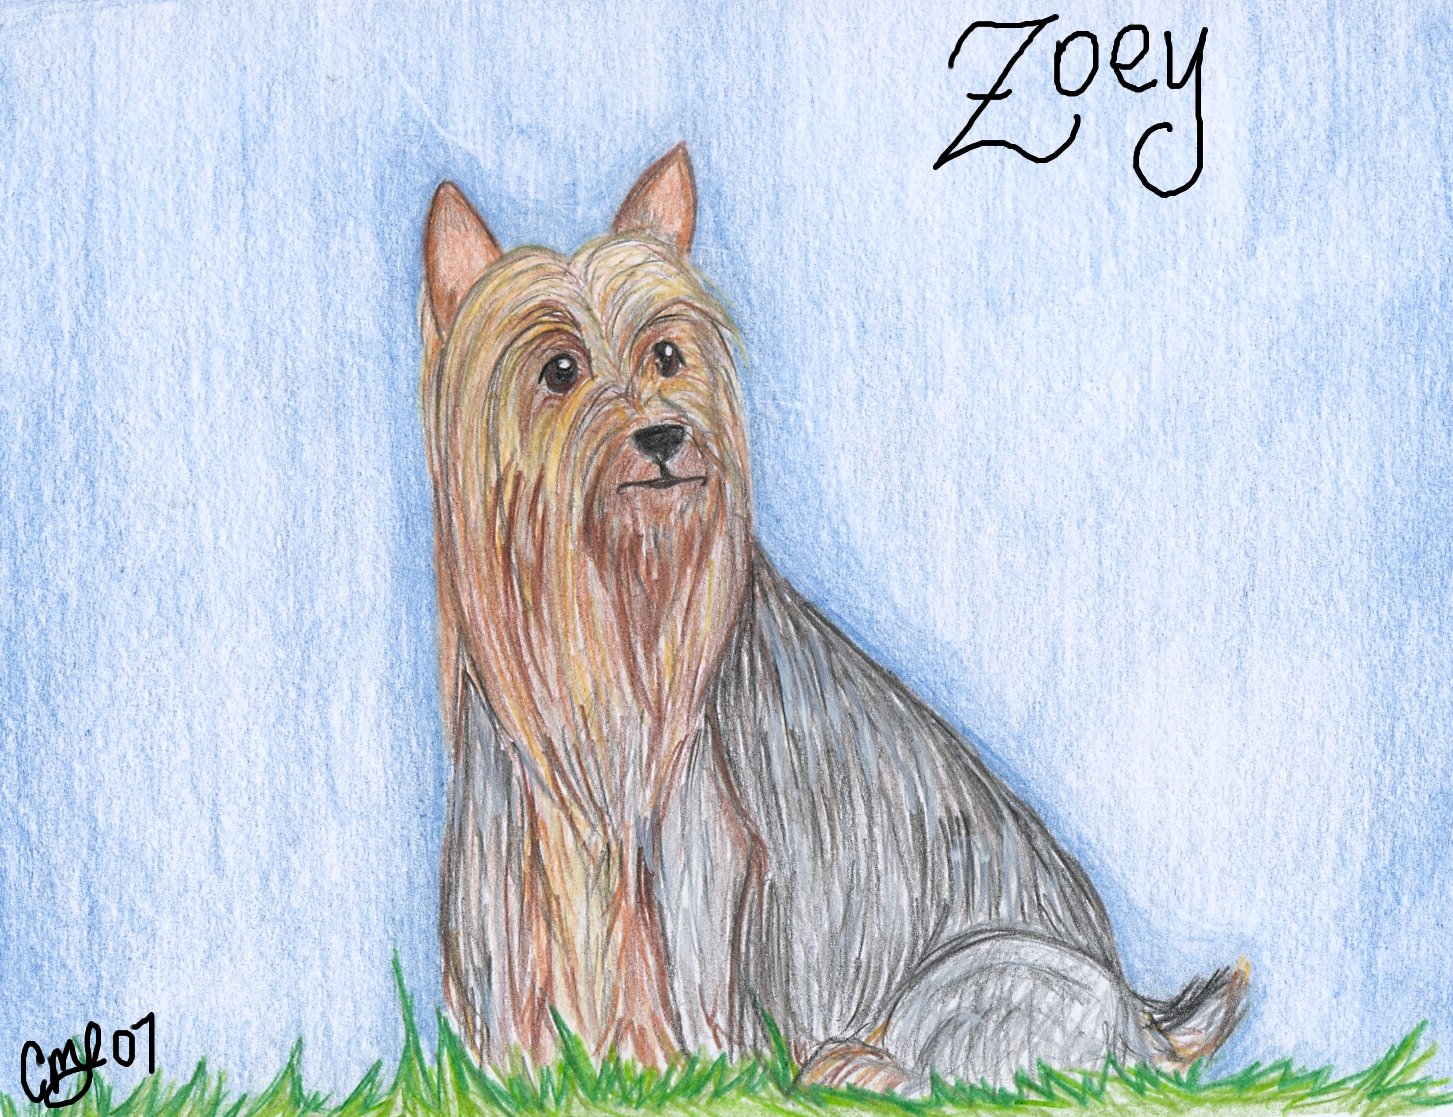 Zoey by thelump